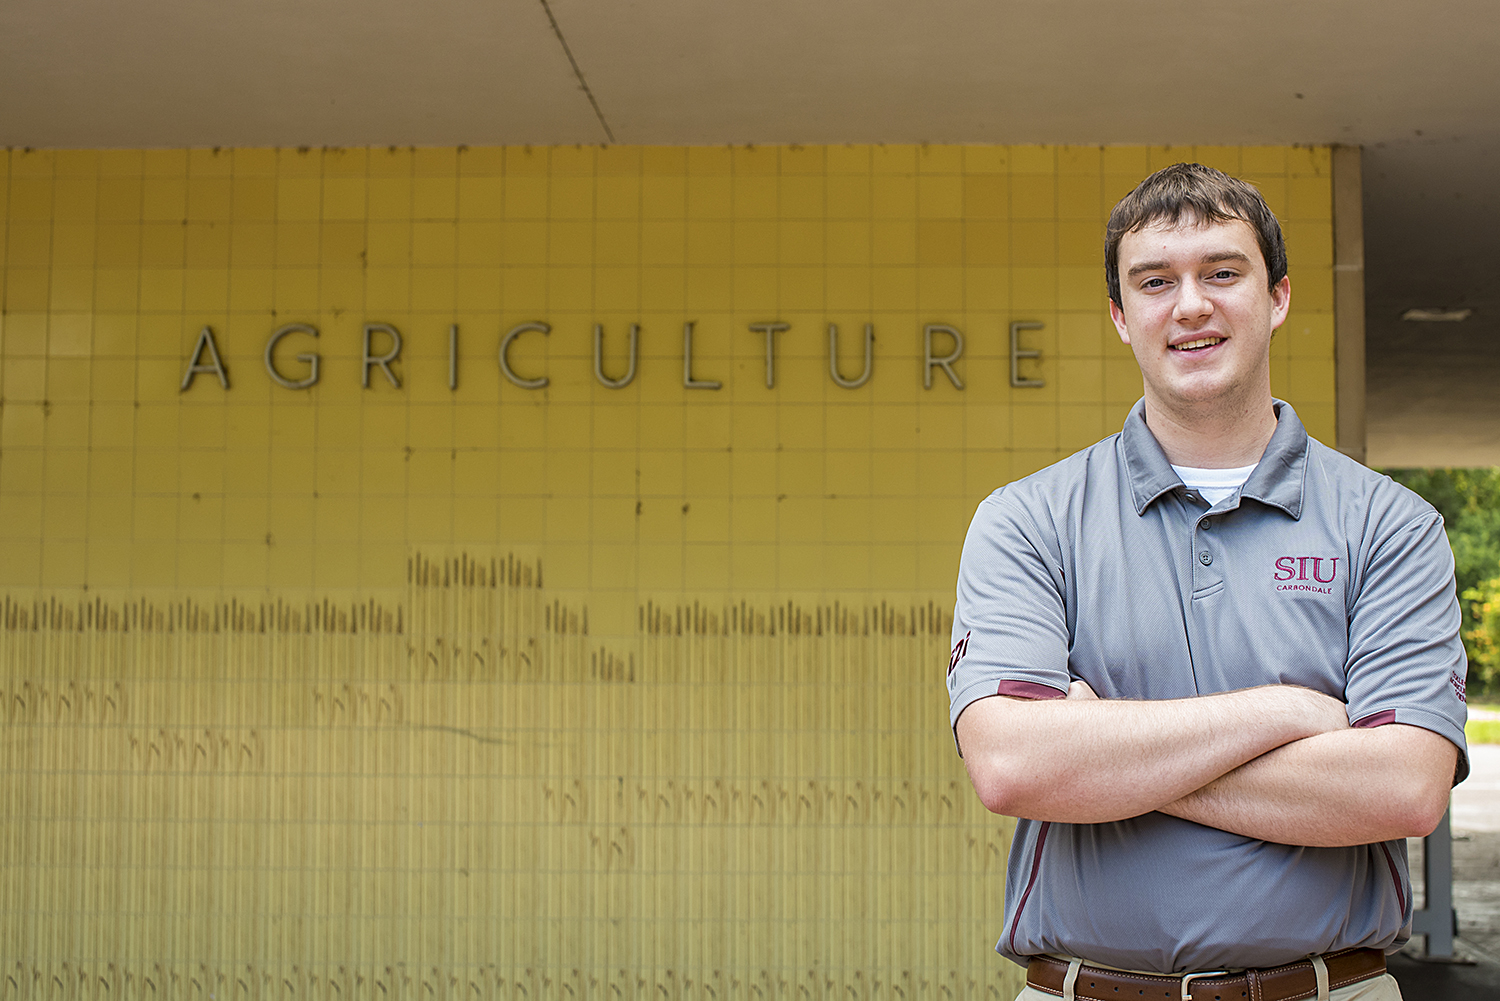 Paxton Morse, freshman at SIU College of Agricultural Sciences